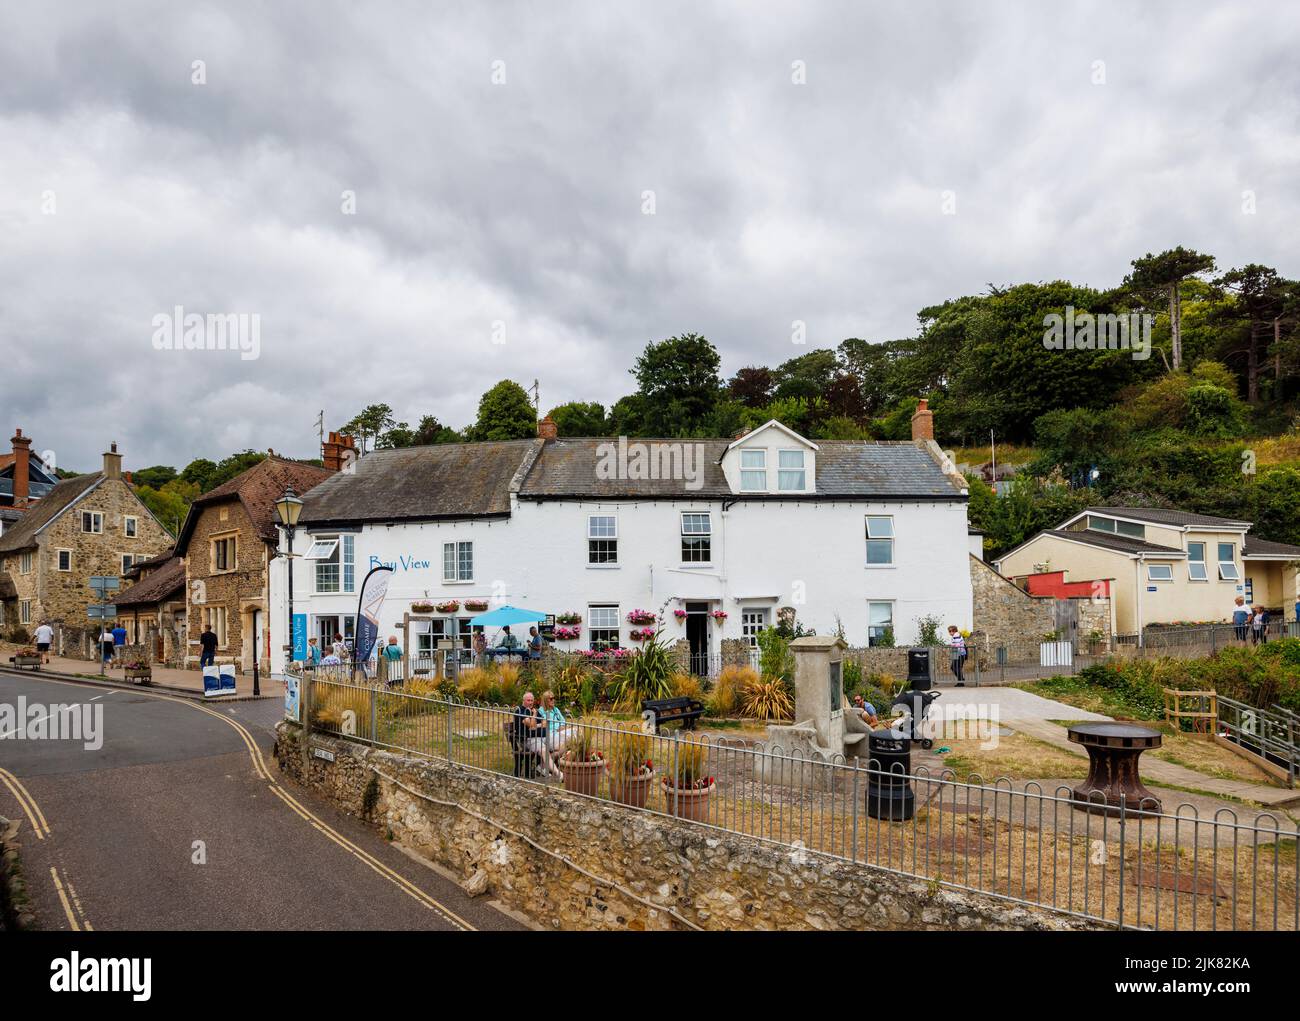 Street scene in Beer, a picturesque small coastal village on Lyme Bay in the Jurassic Coast of East Dorset, south-west England Stock Photo